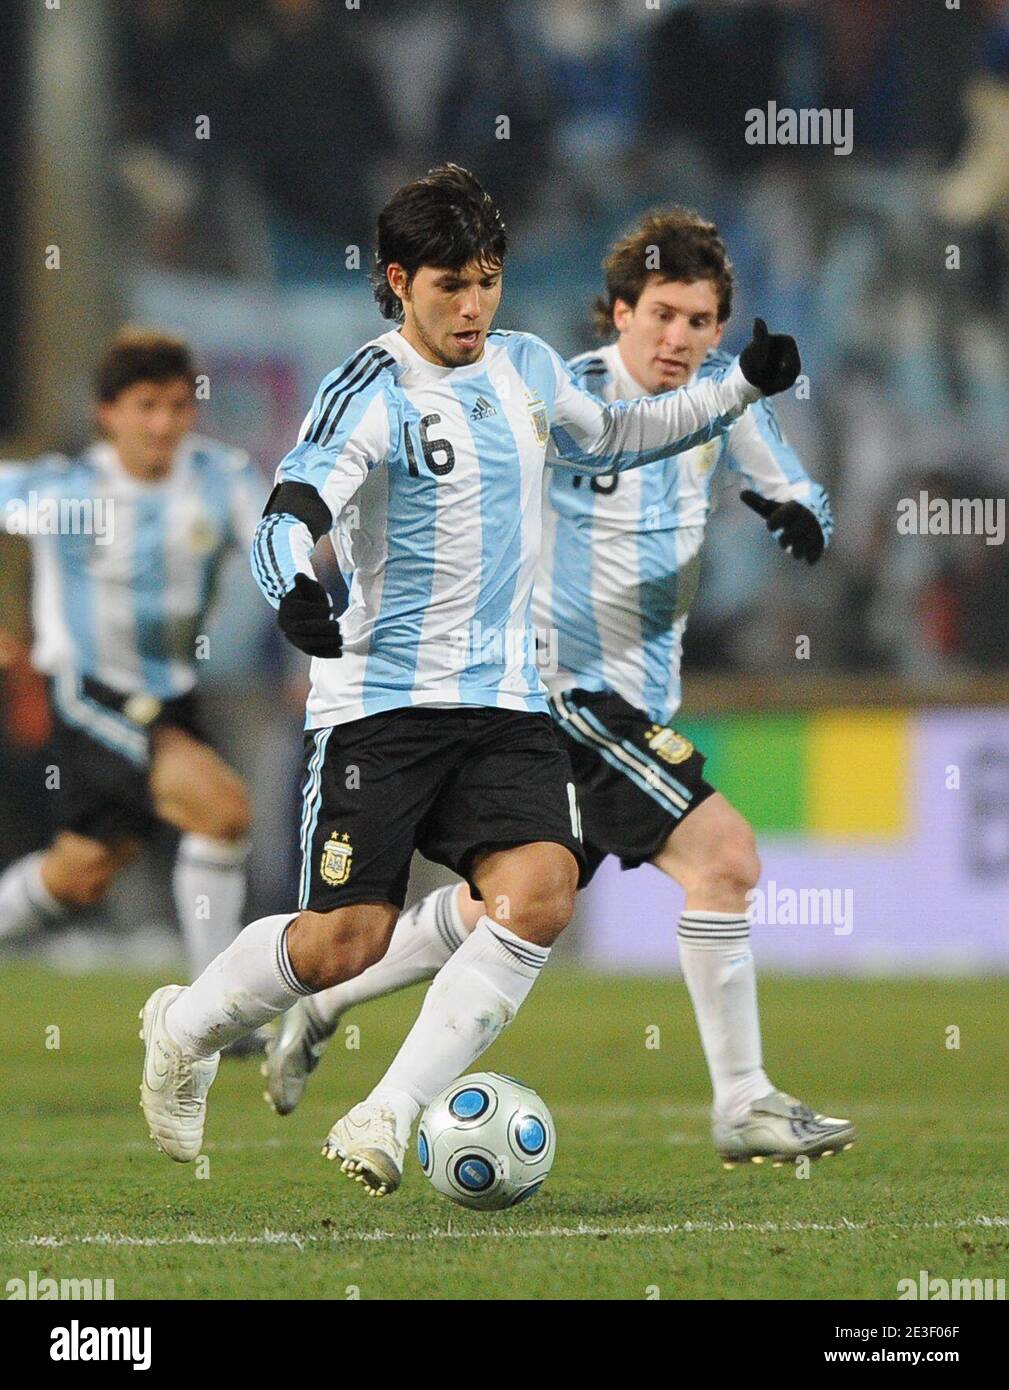 Argentina's Sergio Leonel Aguero during the International Friendly Soccer match, France vs Argentina at the velodrome Stadium in Marseille, France on February 11, 2009. Argentina won 2-0. Photo by Steeve McMay/ABACAPRESS.COM Stock Photo